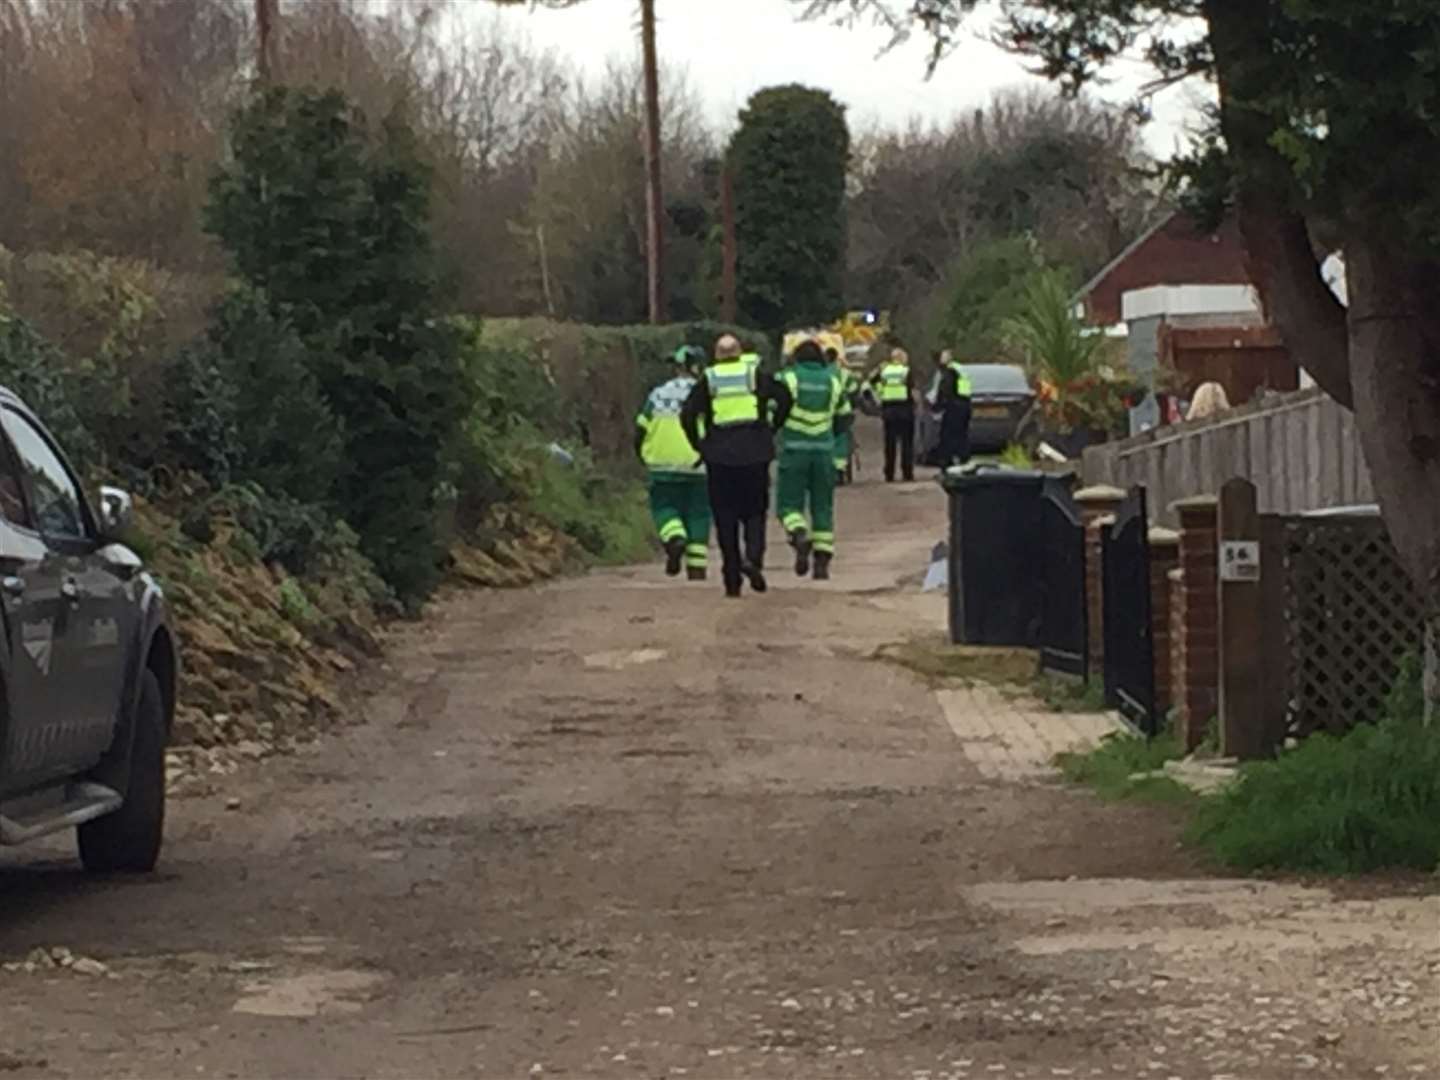 Emergency services have been spotted in Ryarsh Lane, West Malling (43381121)